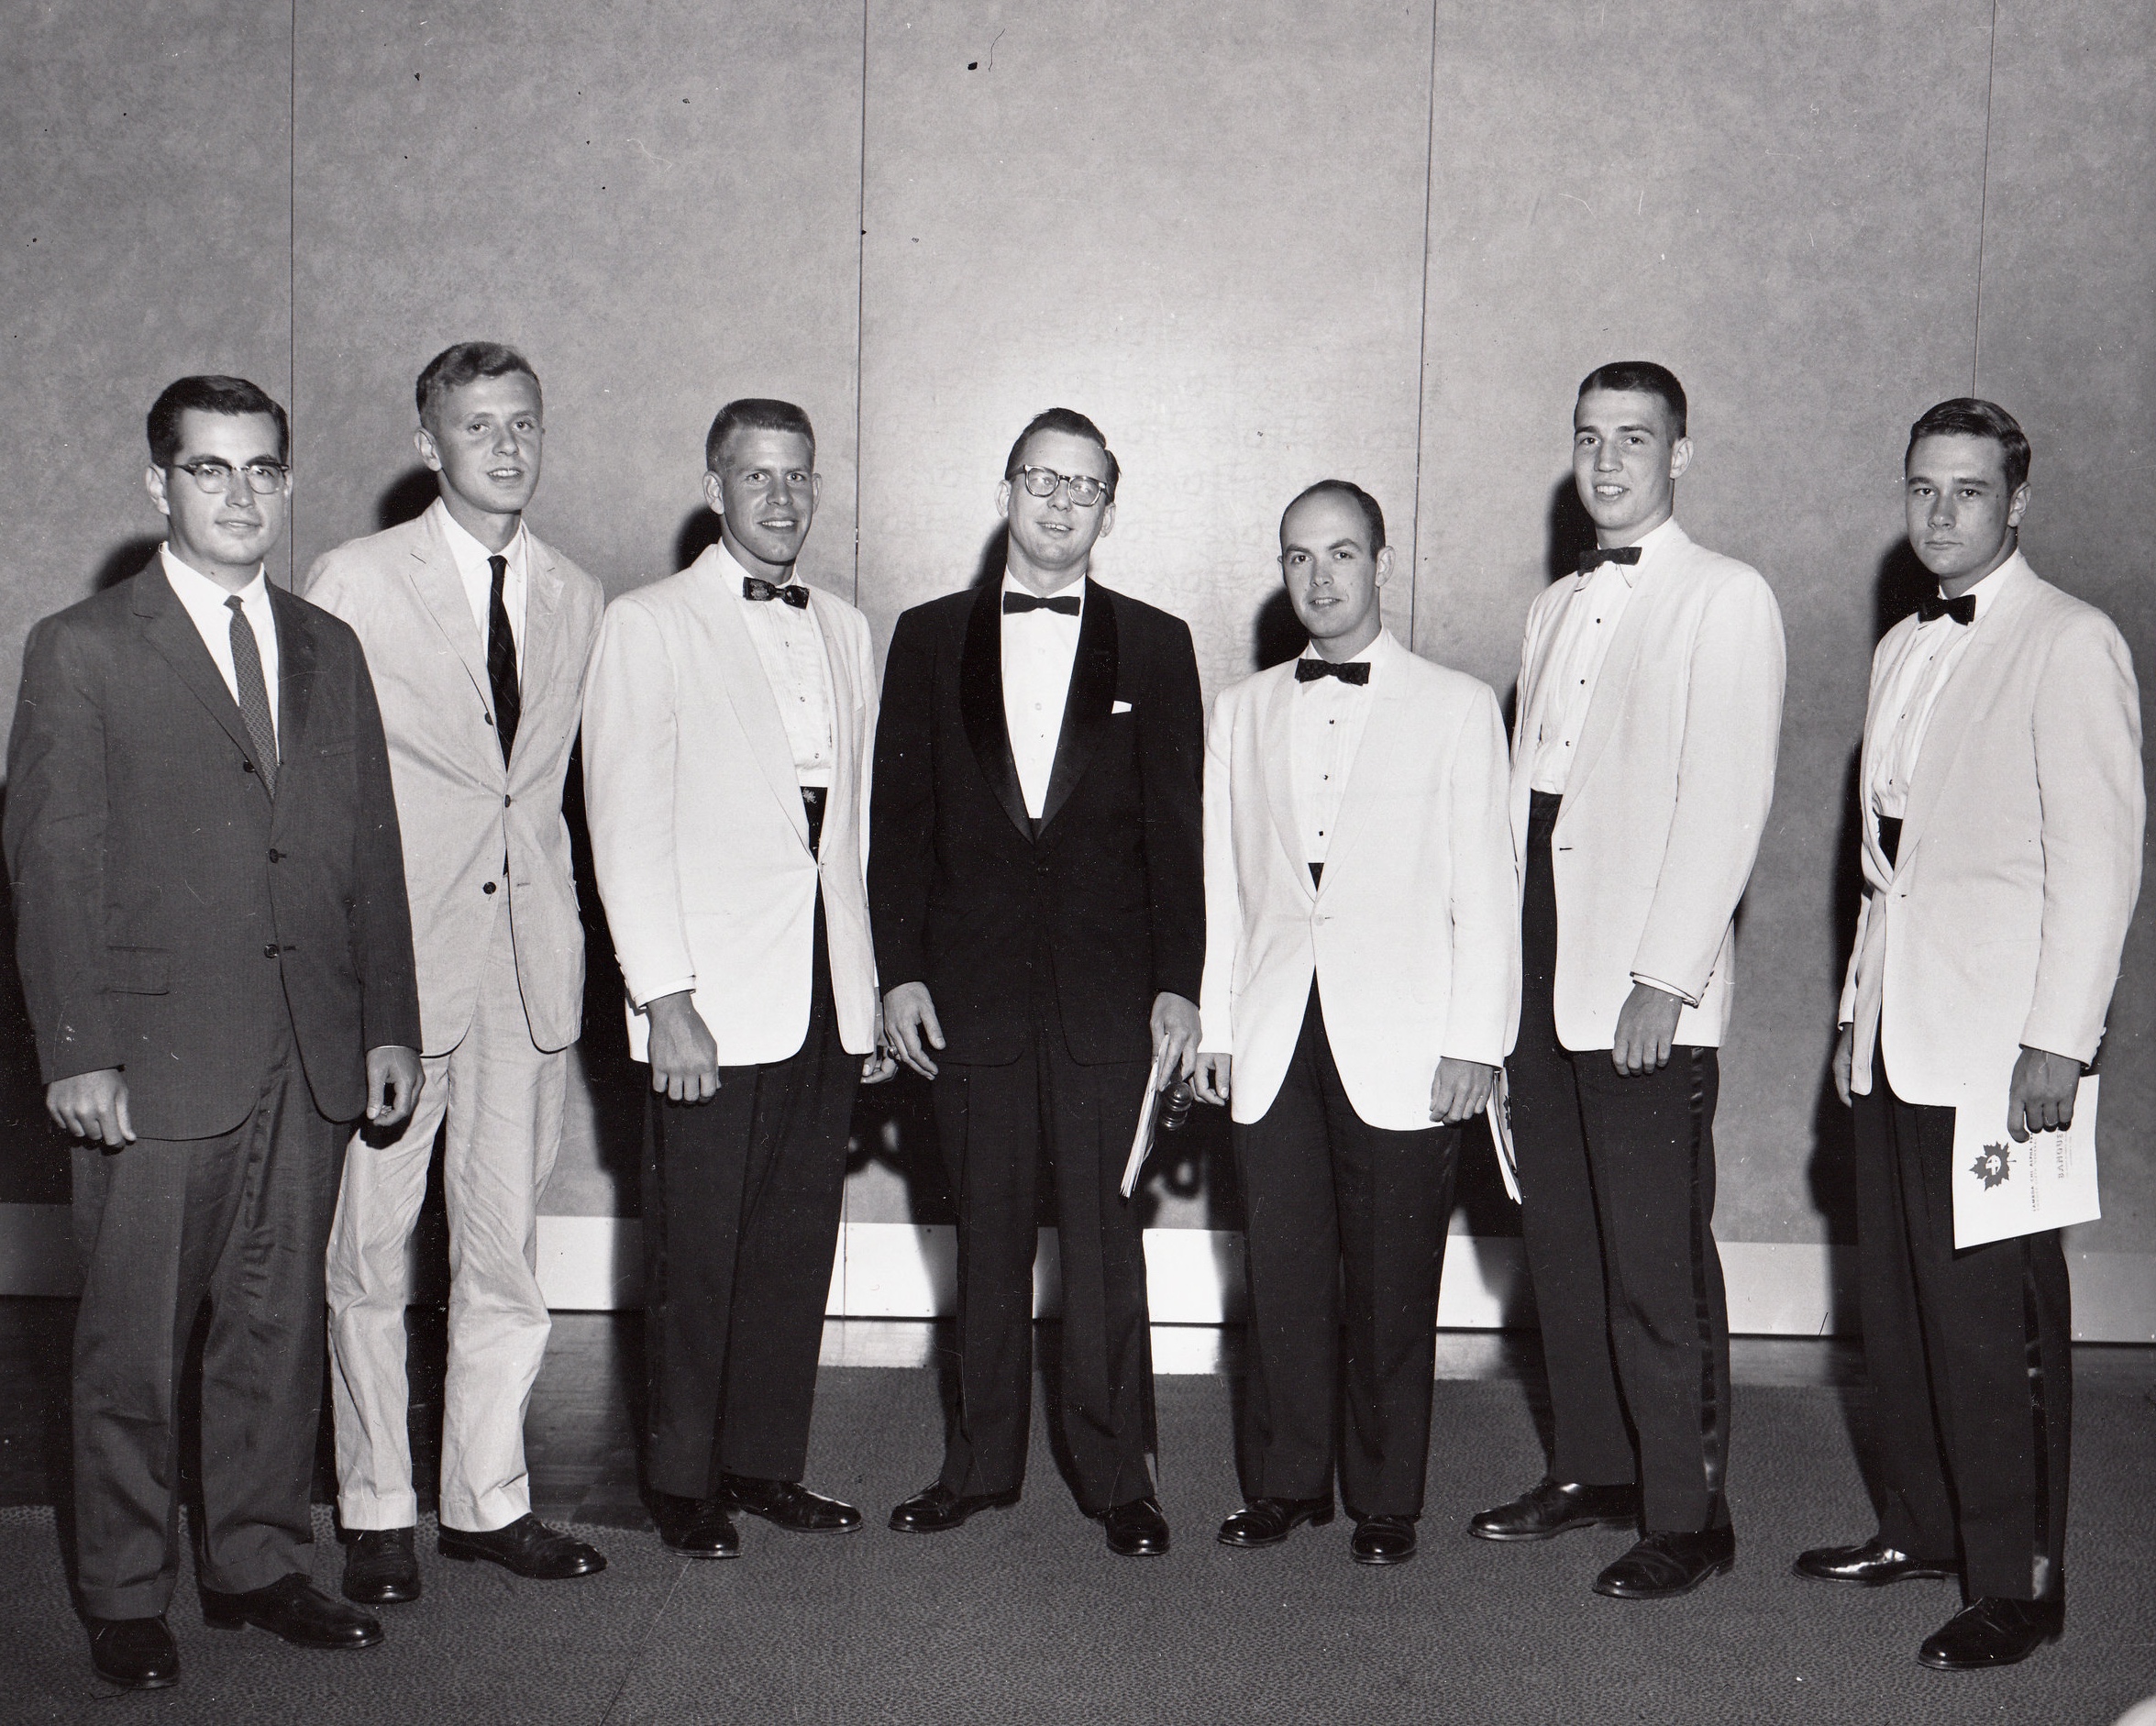 With Sigma’s delegates at the 26th General Assembly in Montréal, 1958